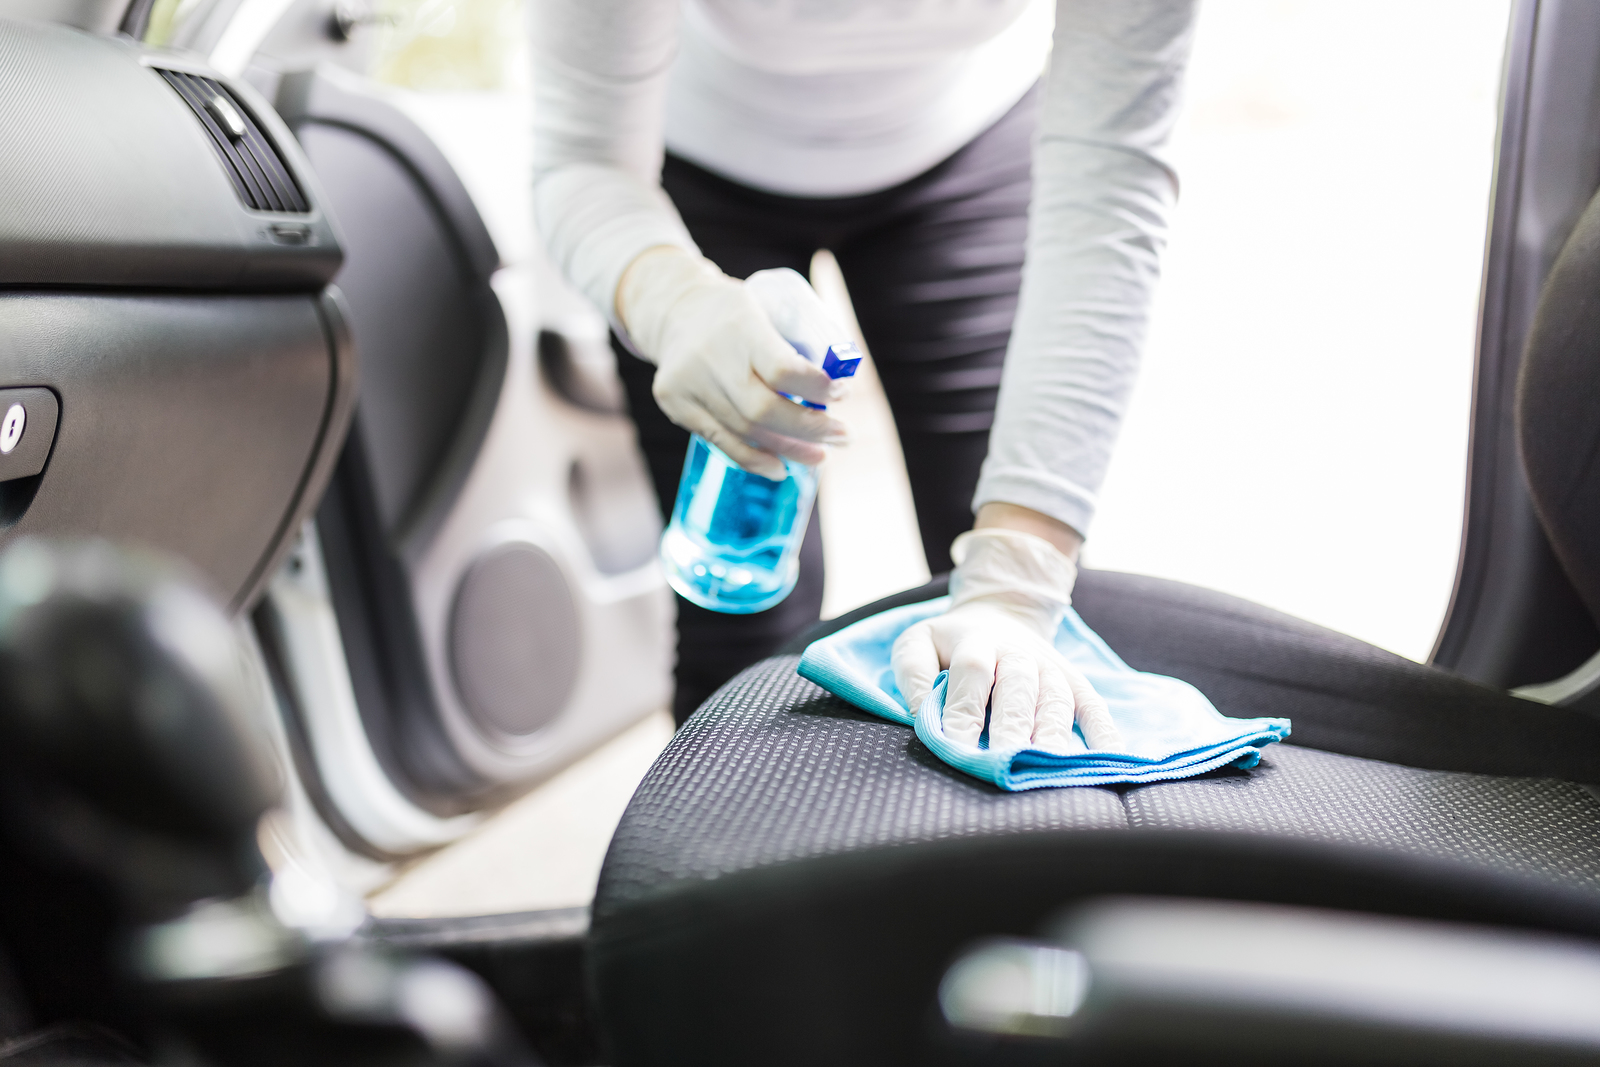 Get Stains Out Of Fabric Car Seats, How To Clean Chairs In Car